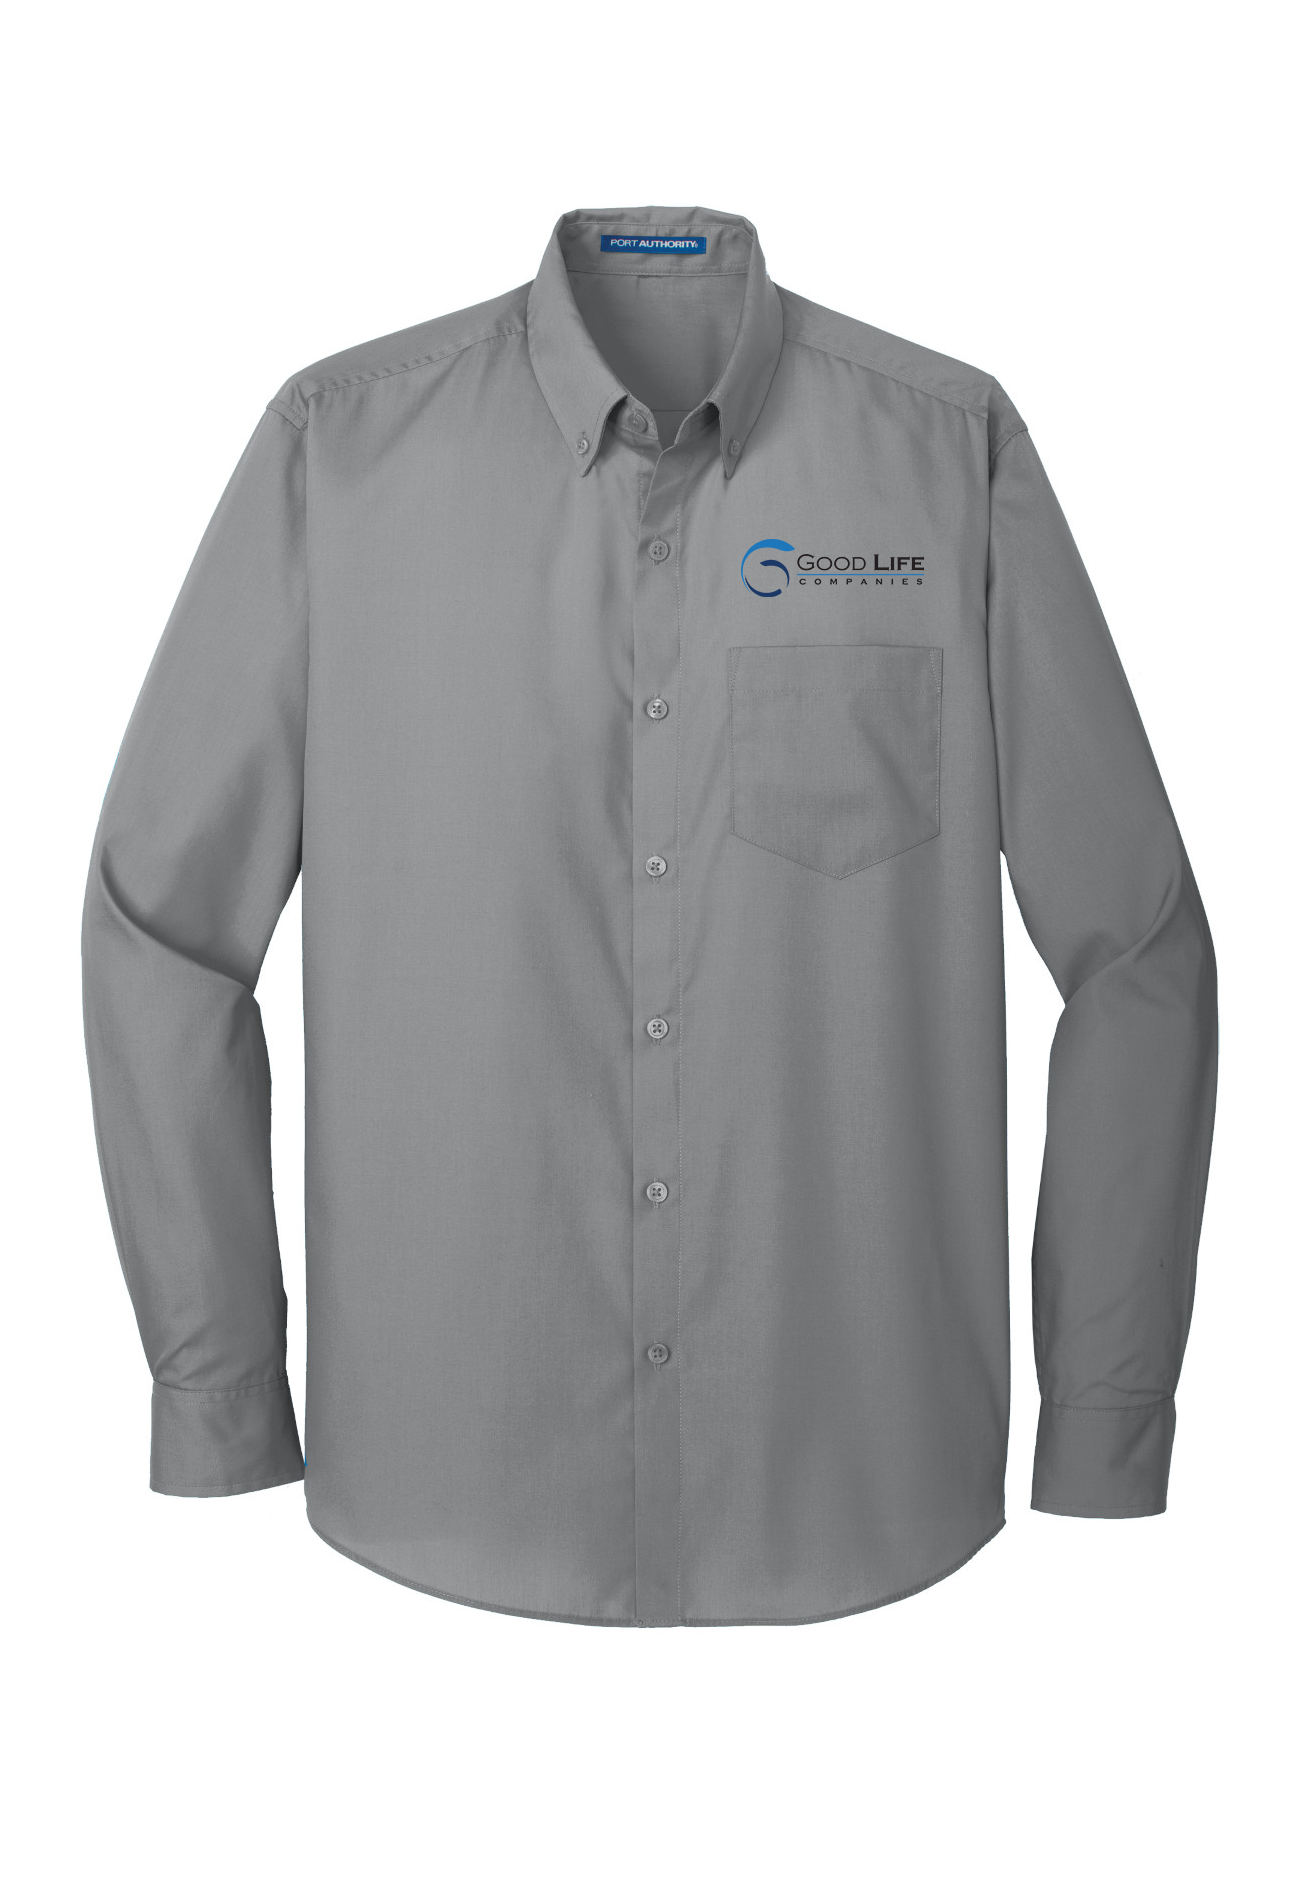 Port Authority® Long Sleeve Carefree Poplin Shirt (Add'l Color Options)